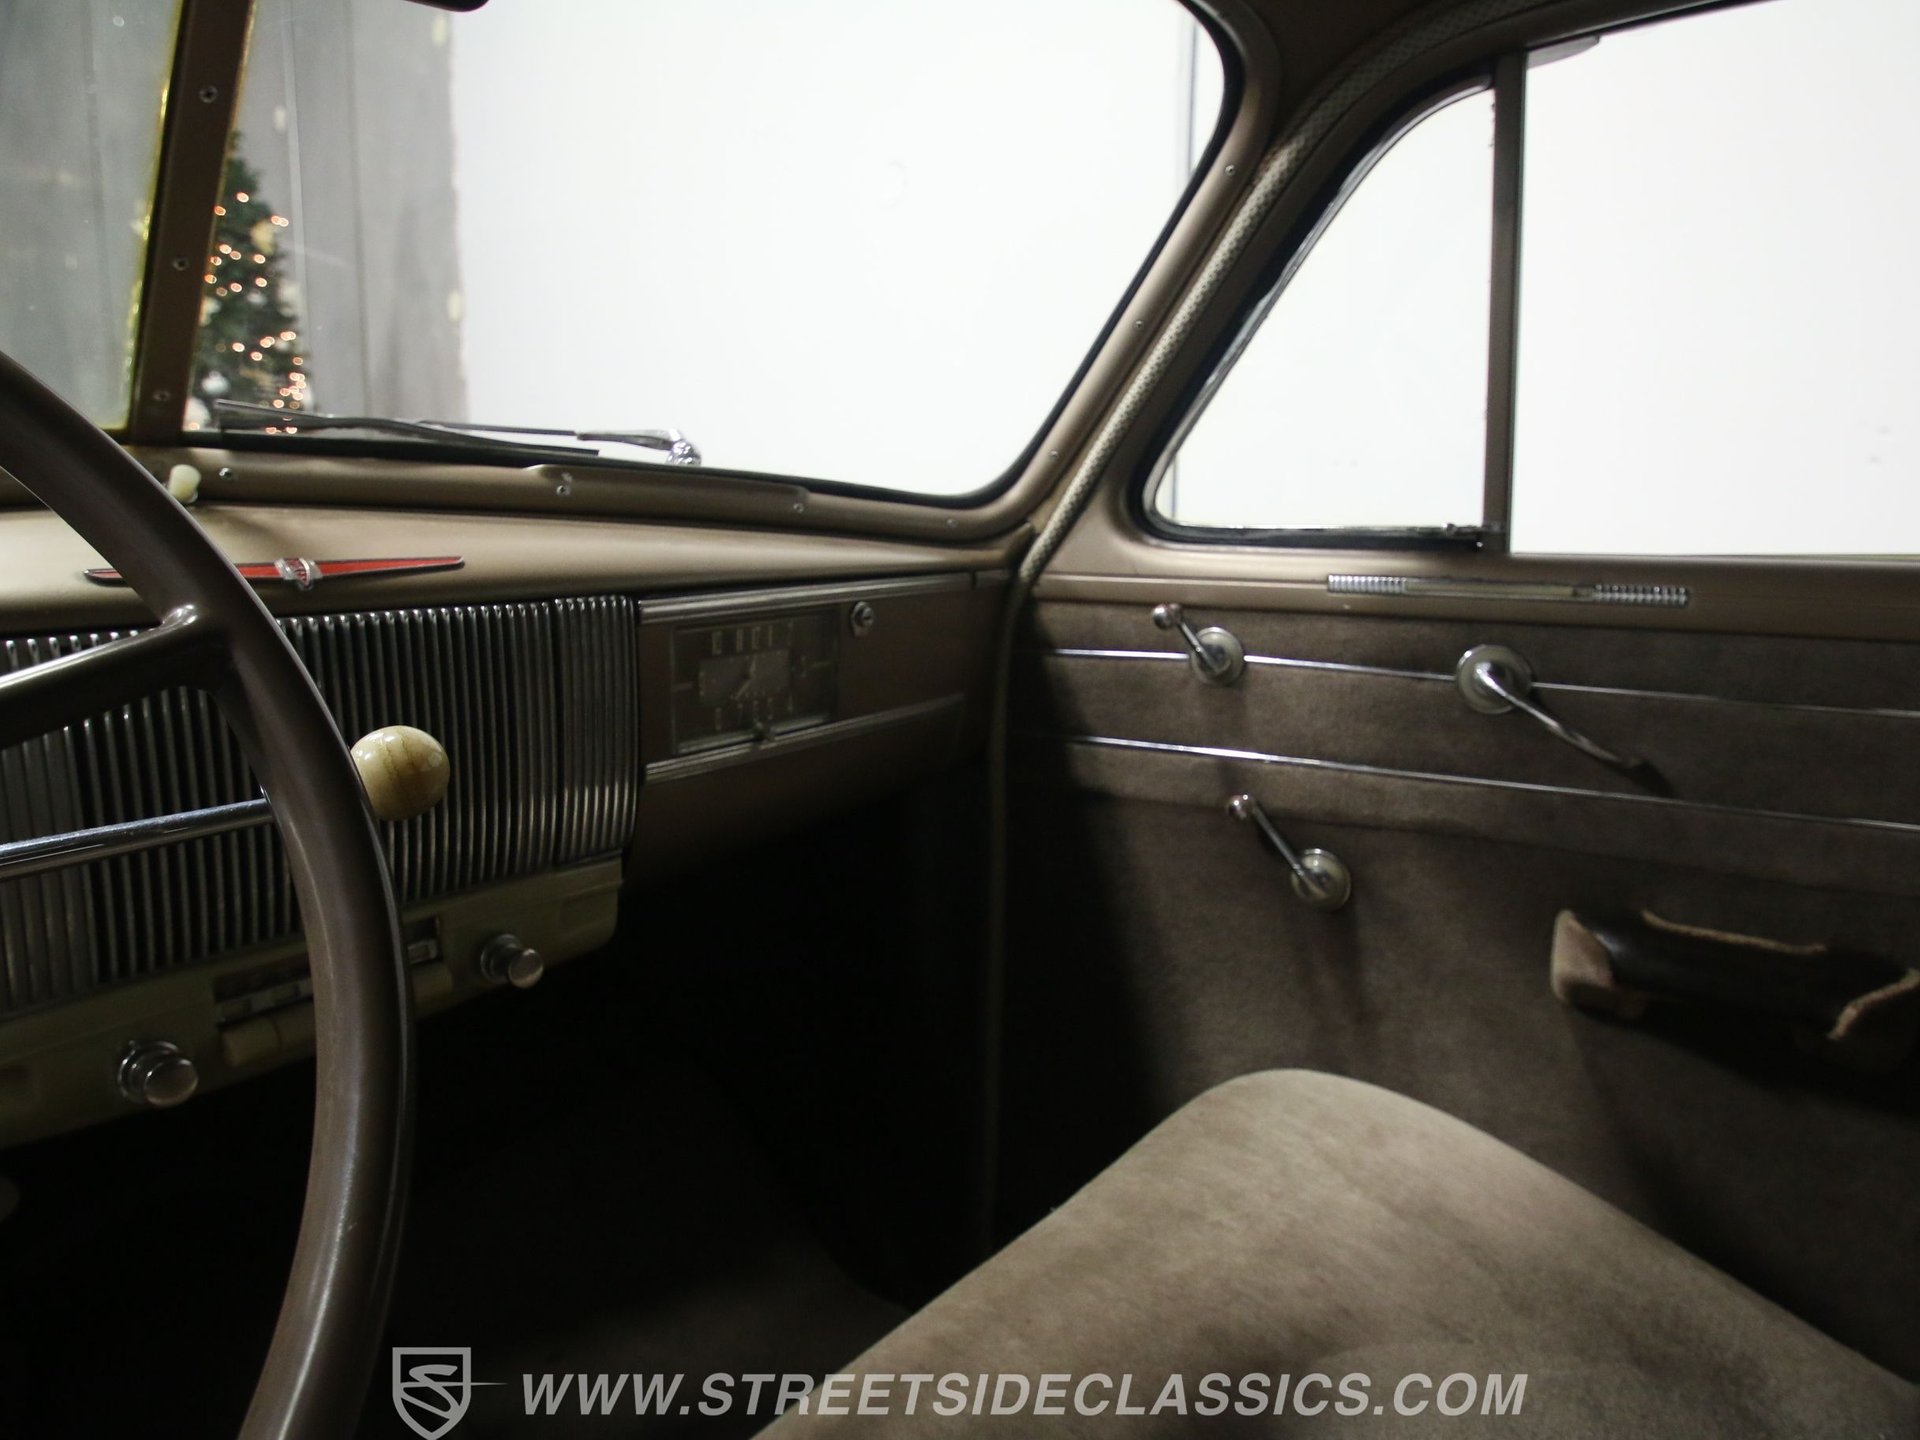 freedom Fore type Assert 1940 Oldsmobile Series 70 | Classic Cars for Sale - Streetside Classics